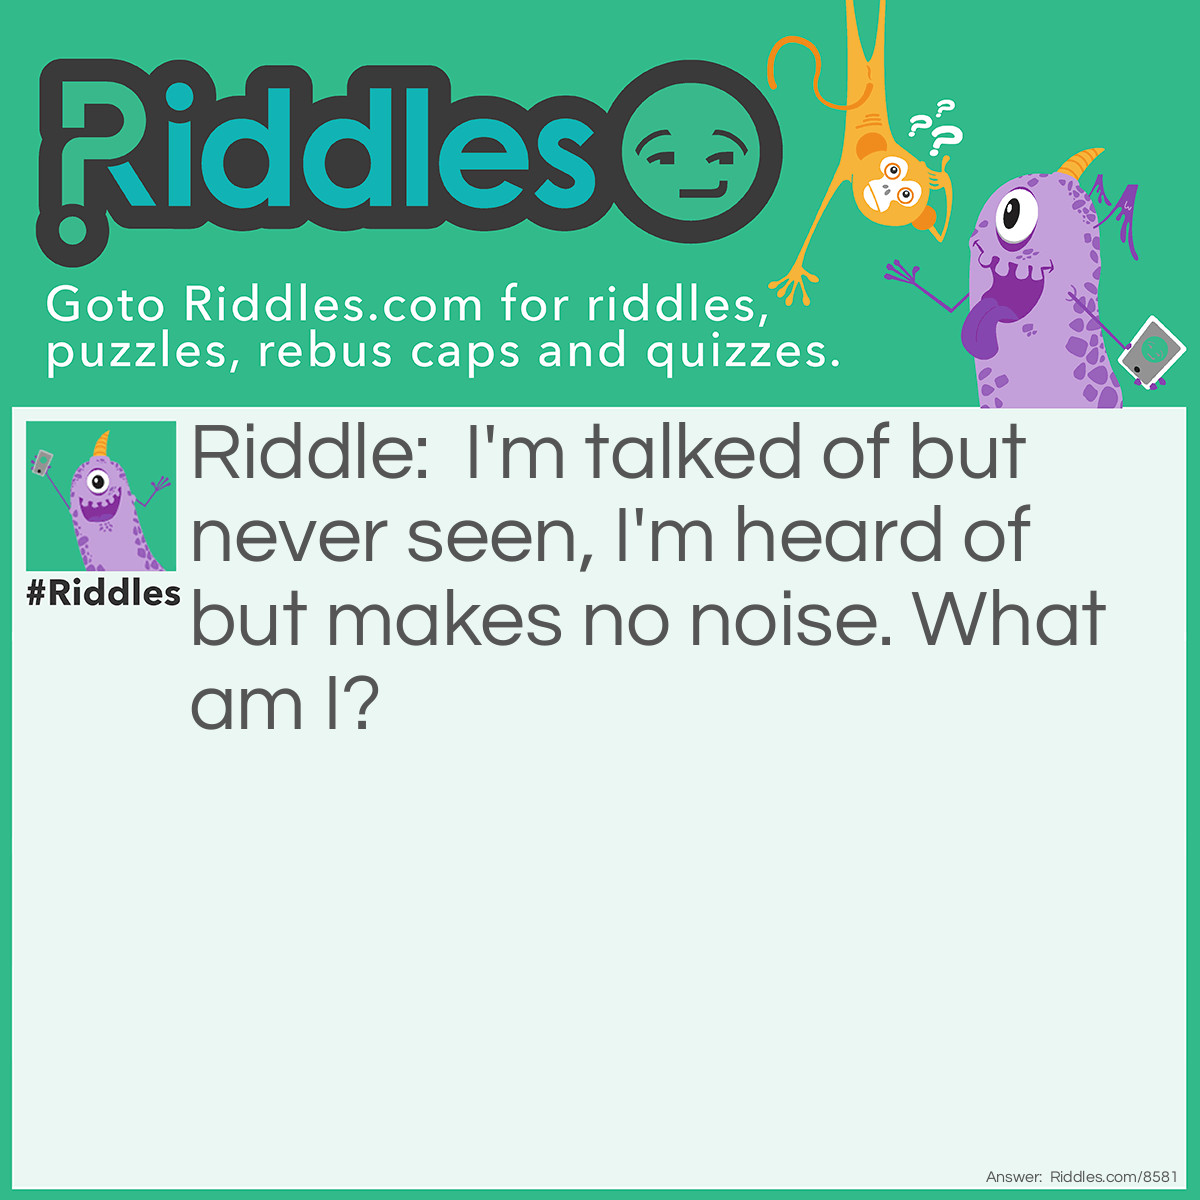 Riddle: I'm talked of but never seen, I'm heard of but makes no noise. What am I? Answer: Your birthday!